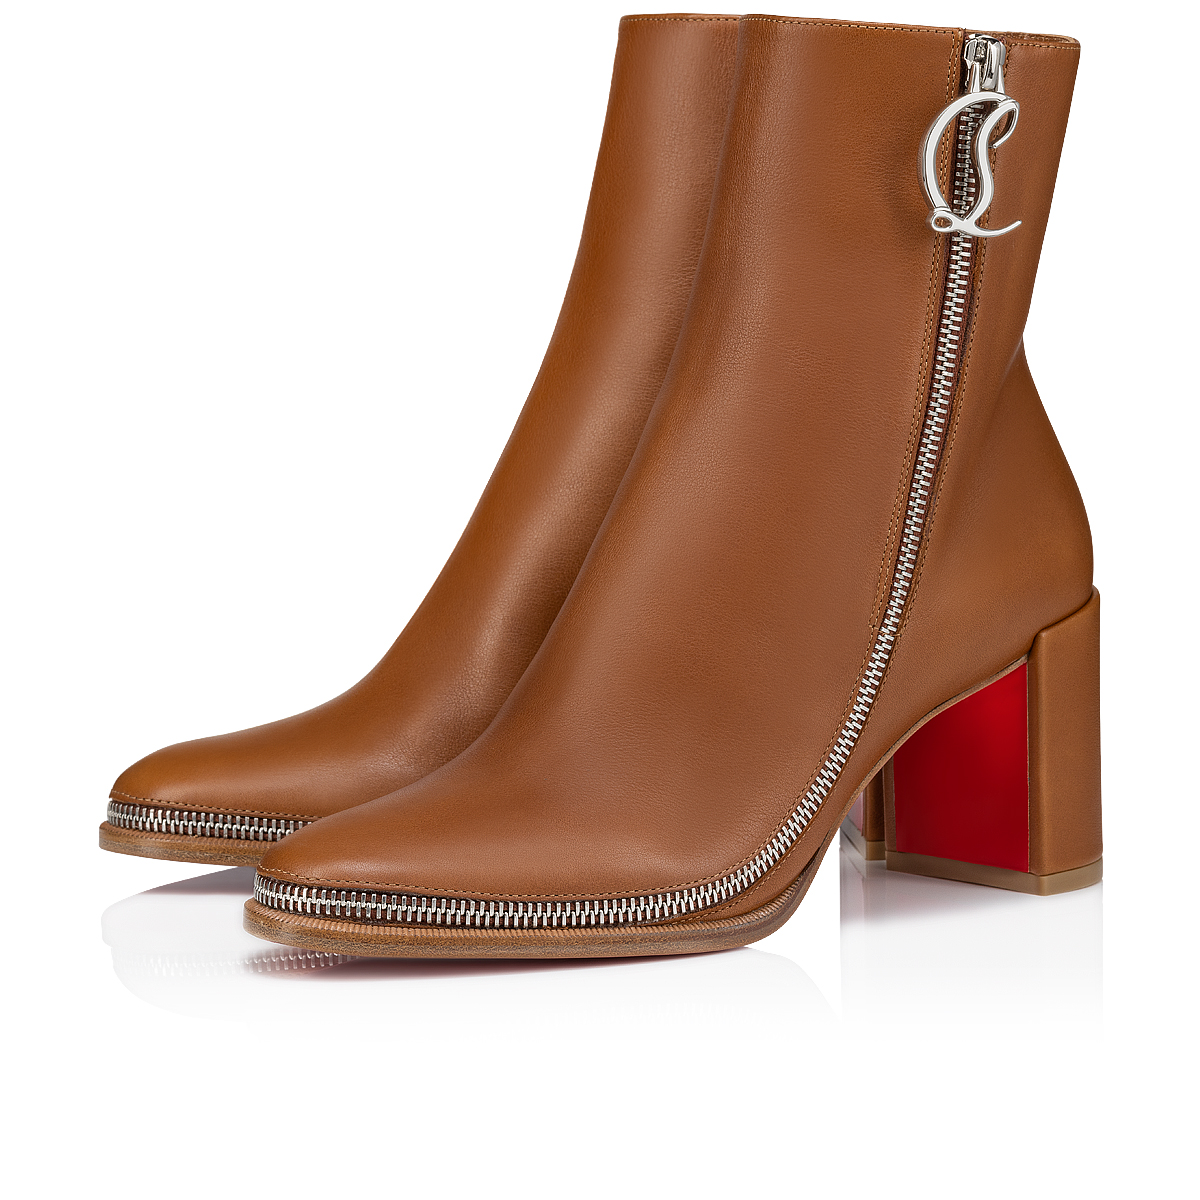 CL Zip Booty - 70 mm Low boots - Calf leather - Cuoio - Women